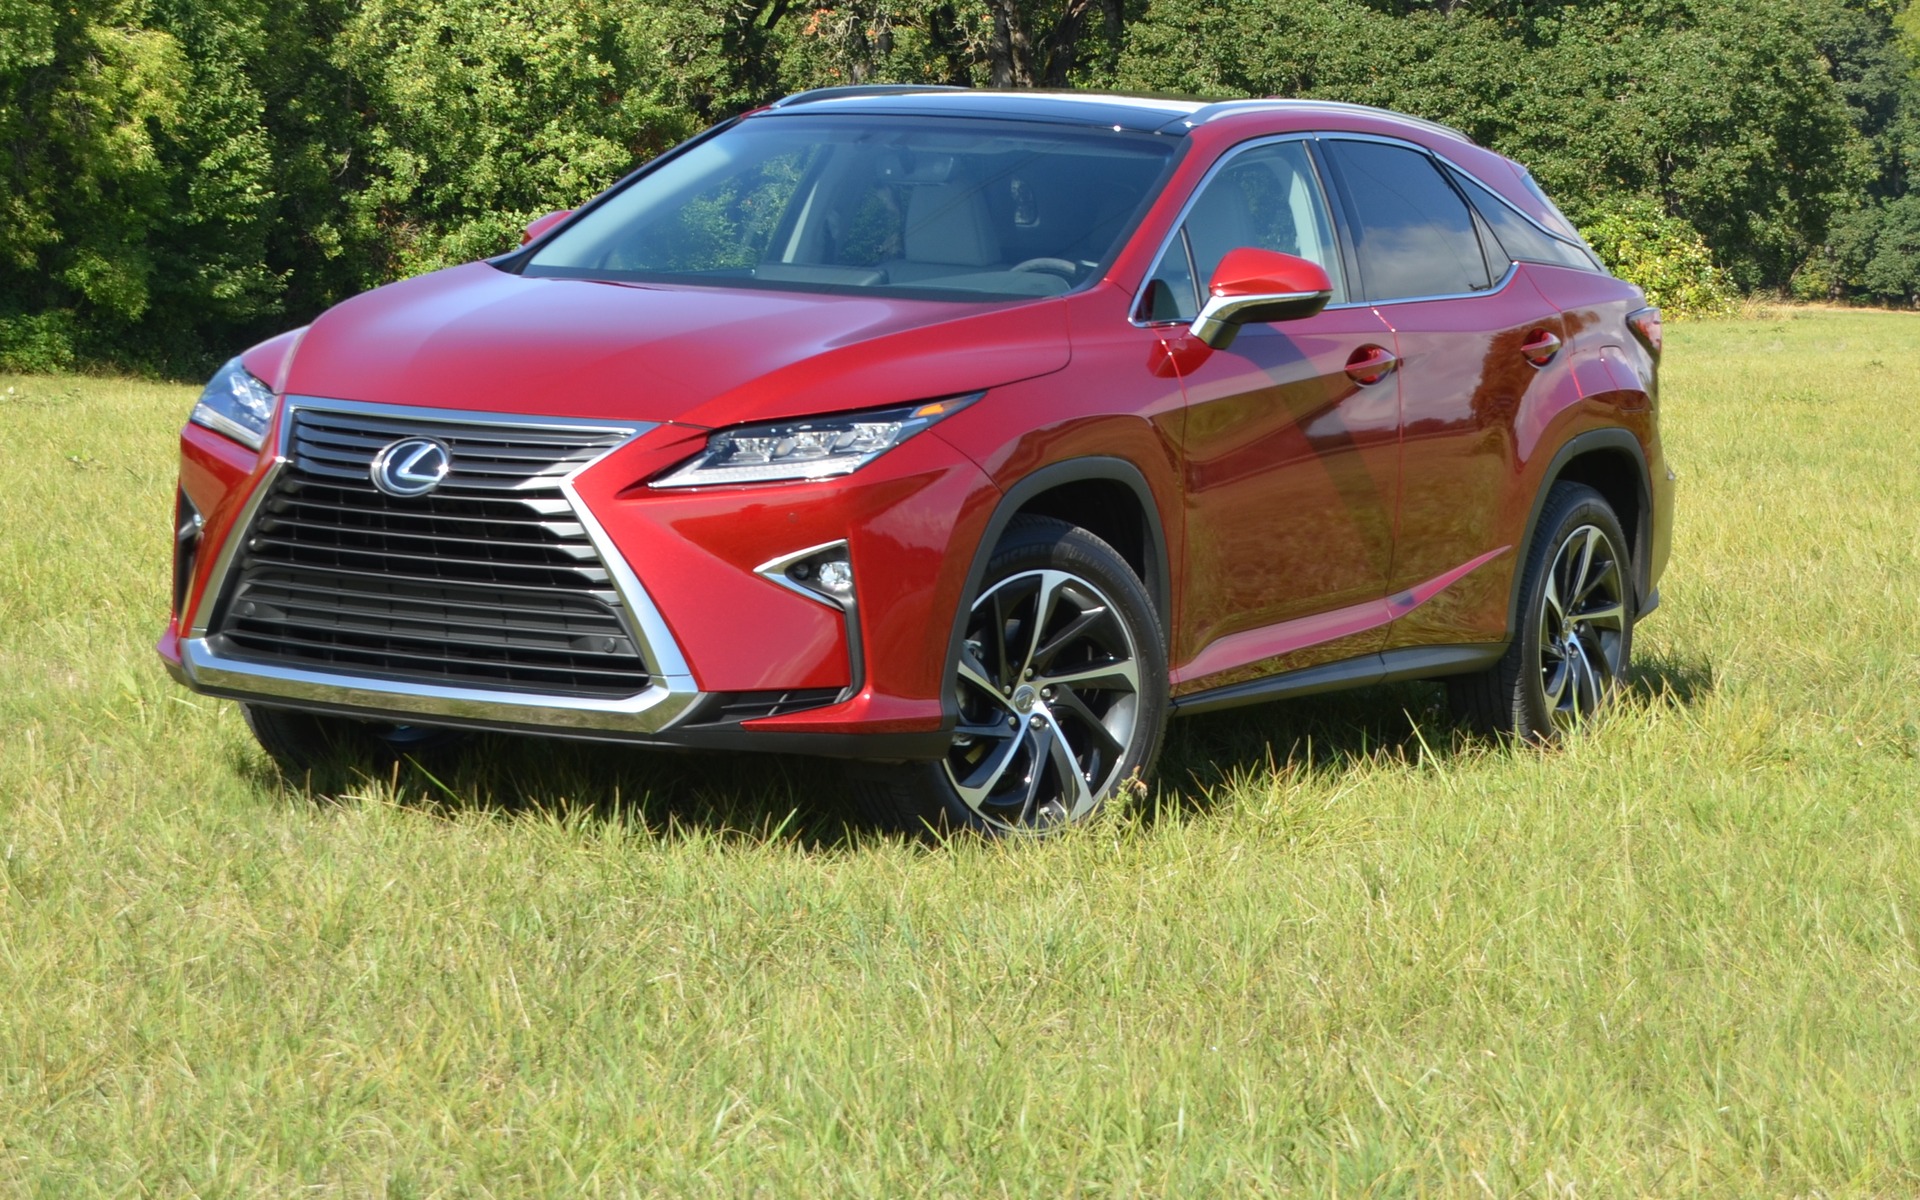 The new Lexus RX is sharply chiselled. This is an RX 350.